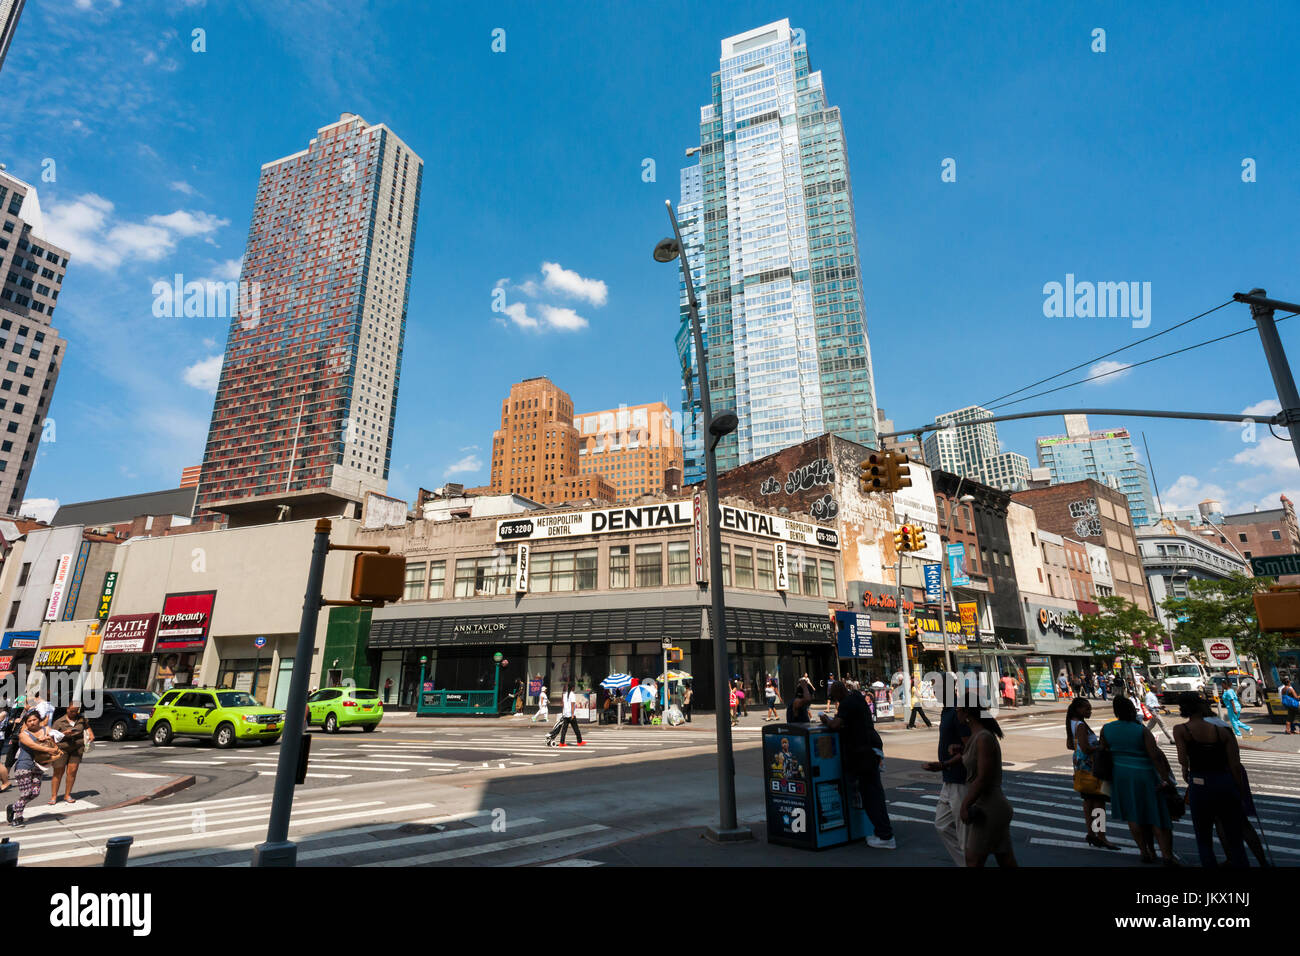 Residential development rises above Downtown Brooklyn in New York on Wednesday, July 19, 2017. The area has been for years a middle and lower economic shopping strip but because of increased development in the area, notably hi-rise luxury apartment buildings, chain stores and high-end retailers are moving in. Rents are rising and the smaller mom and pop stores, as well as regional chains are being forced out.  (© Richard B. Levine) Stock Photo